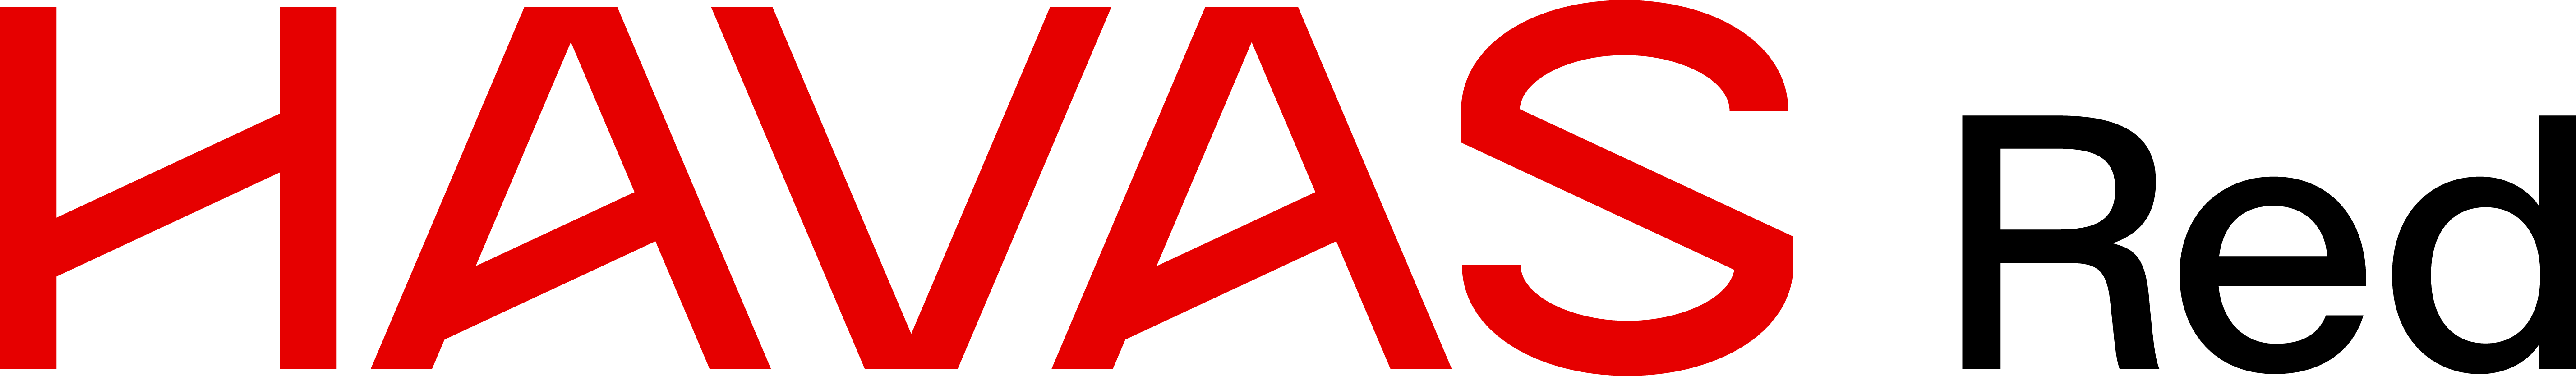 SWITCHING IT UP: WE ARE NOW HAVAS RED￼